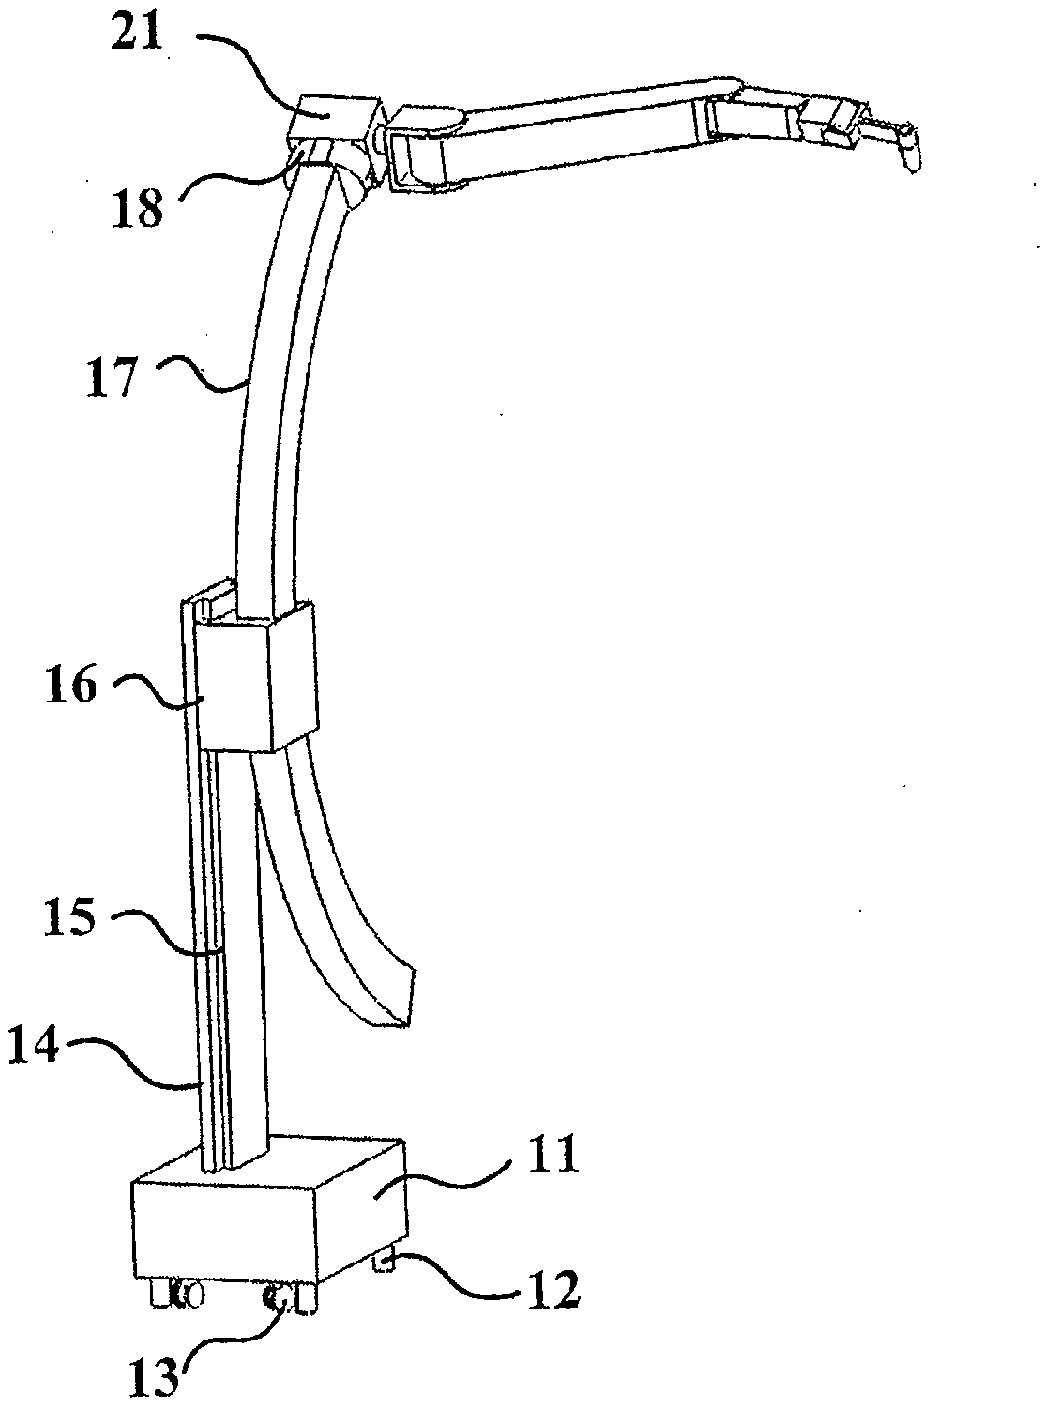 Surgical robot with hybrid passive/active control